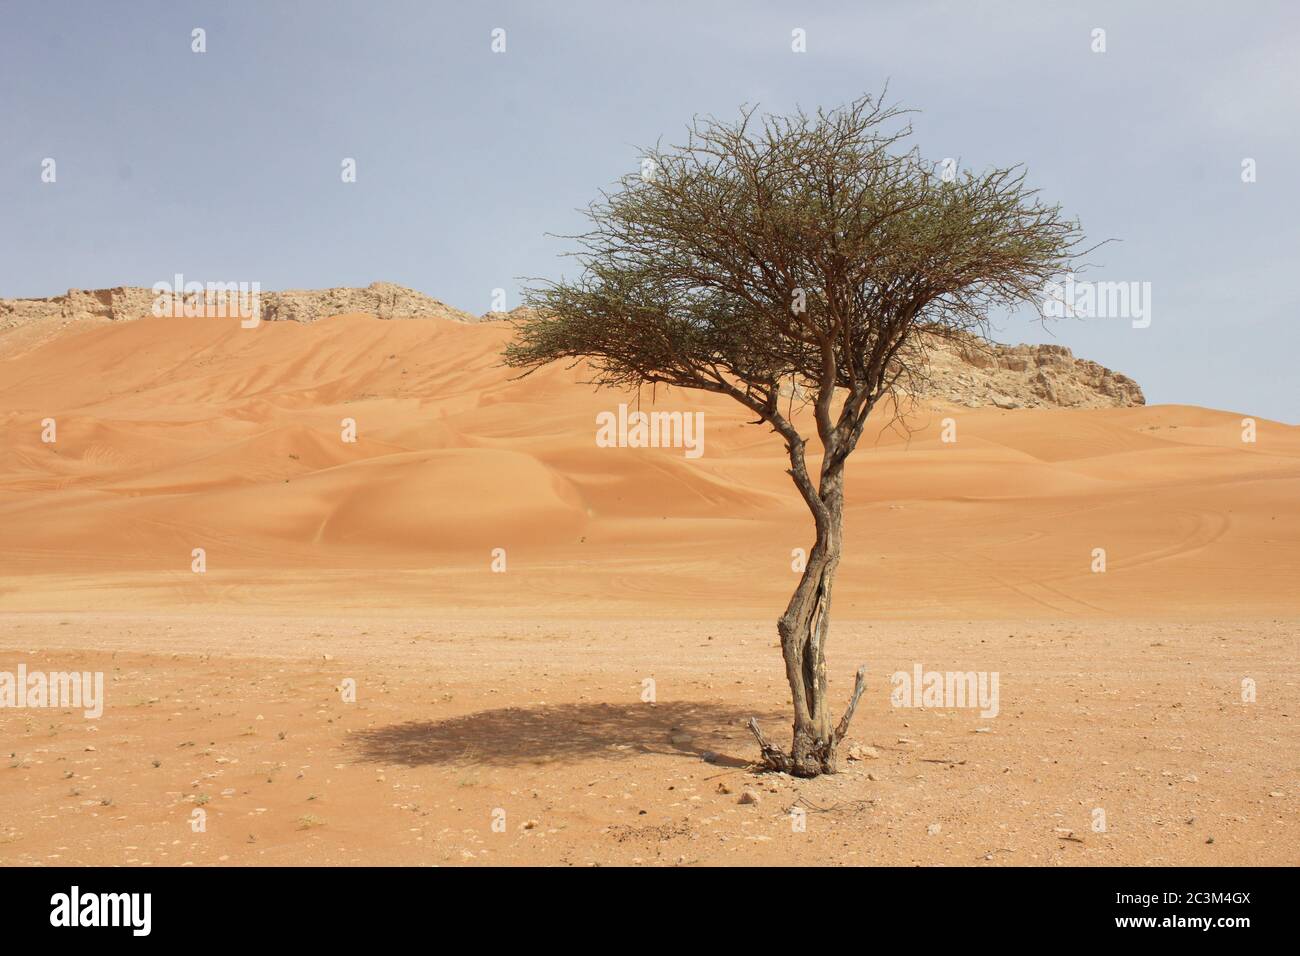 Umbrella Thorn Acacia (Acacia tortilis) tree grows in arid Arabian desert sand dunes. The native plant is browsed by camels, goats and wildlife. Stock Photo